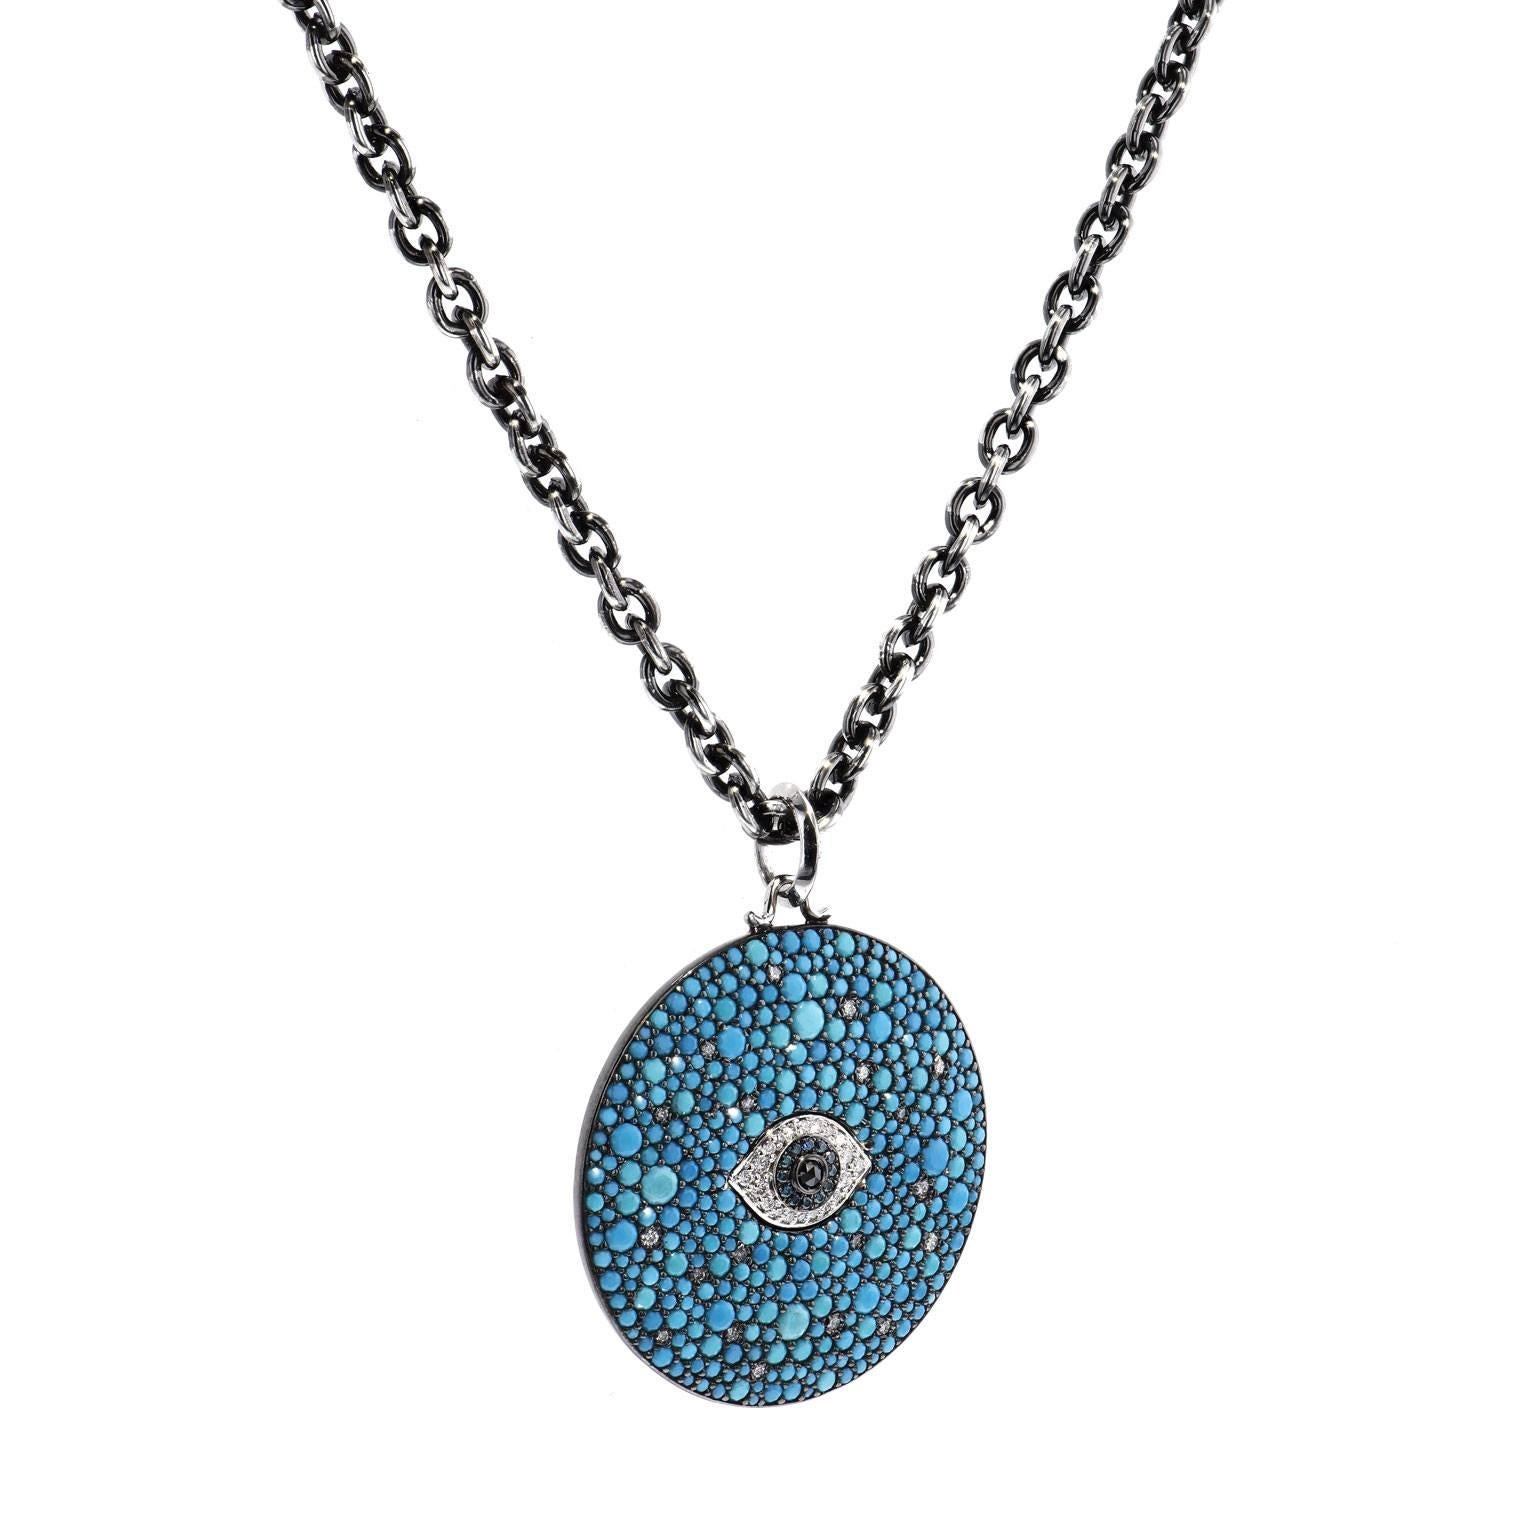 6.15 carat of crushed turquoise sets the base for this diamond evil eye pendant necklace strung on 32 inch silver chain. The evil eye is composed of 0.33 carat of white diamonds, 0.06 carat of blue diamond and 0.05 carat of black diamond set at